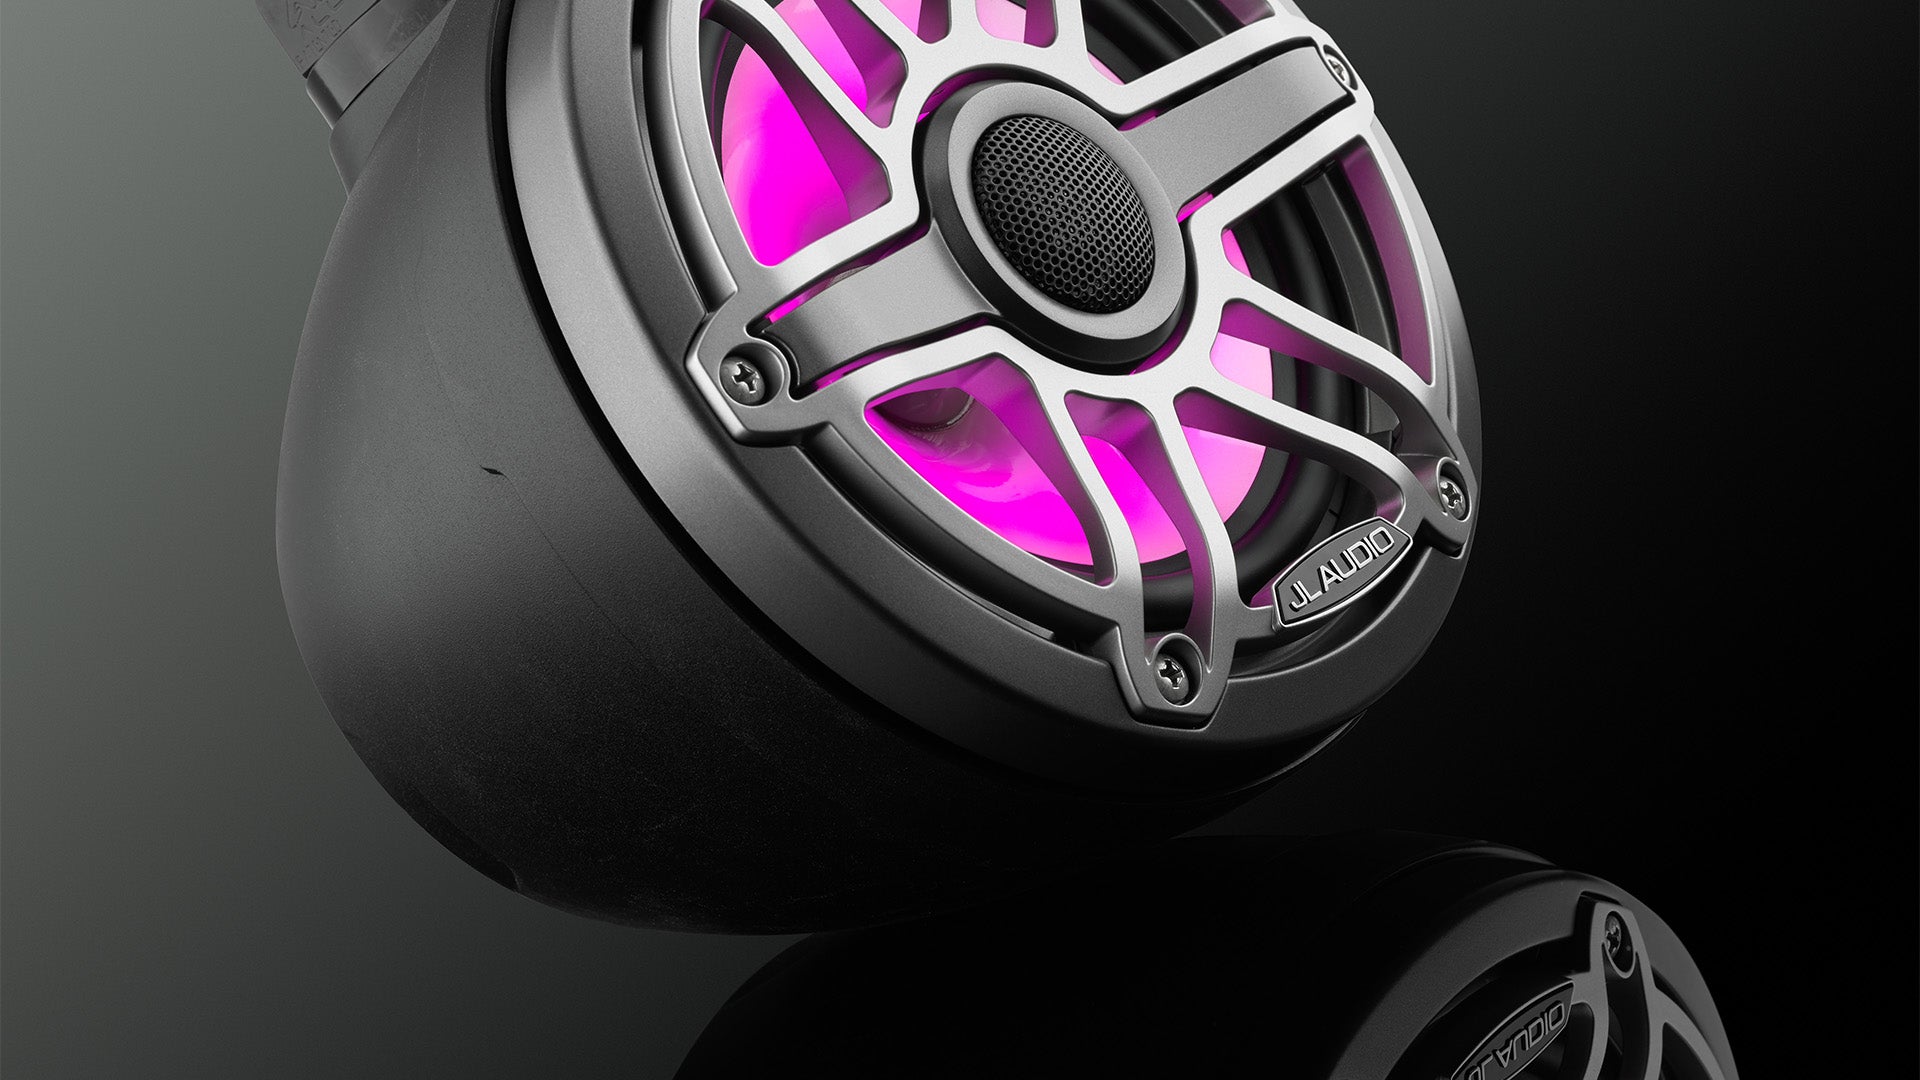 M6 VeX audio unit with pink colored Transflective™ LED technology in a dark sleek setting.